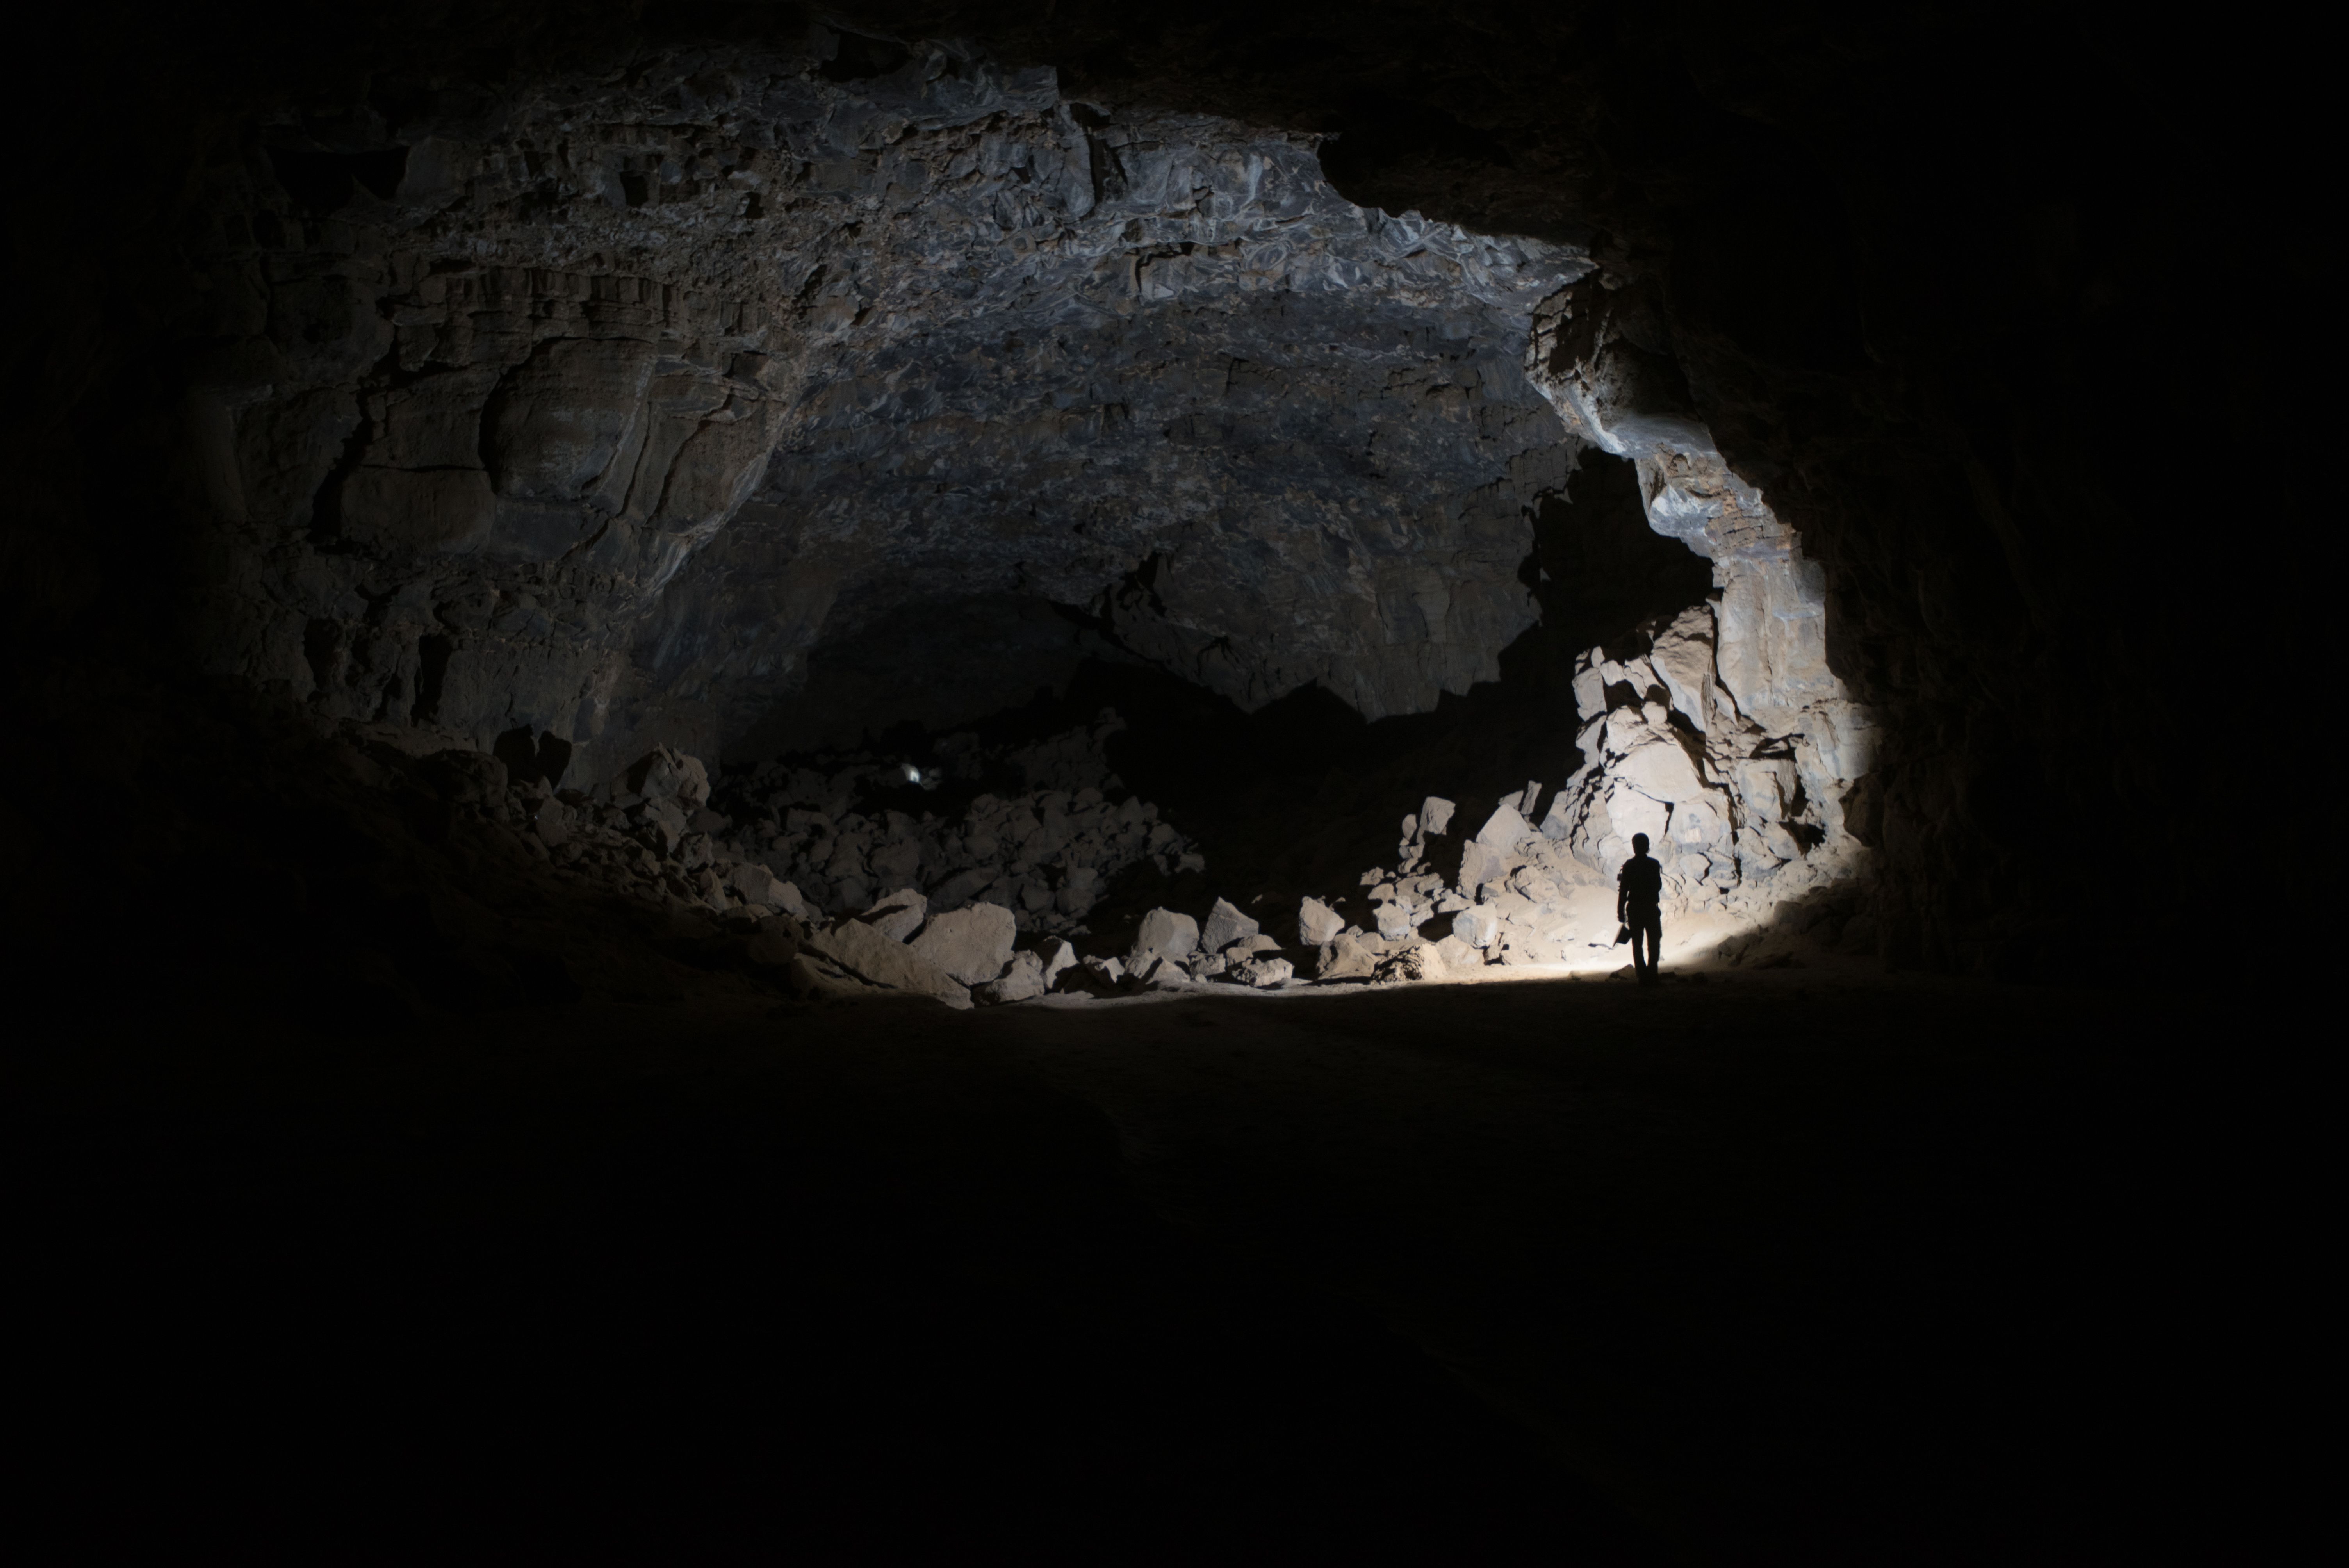 Deep within the Umm Jirsan Cave system. Credit: Green Arabia Project